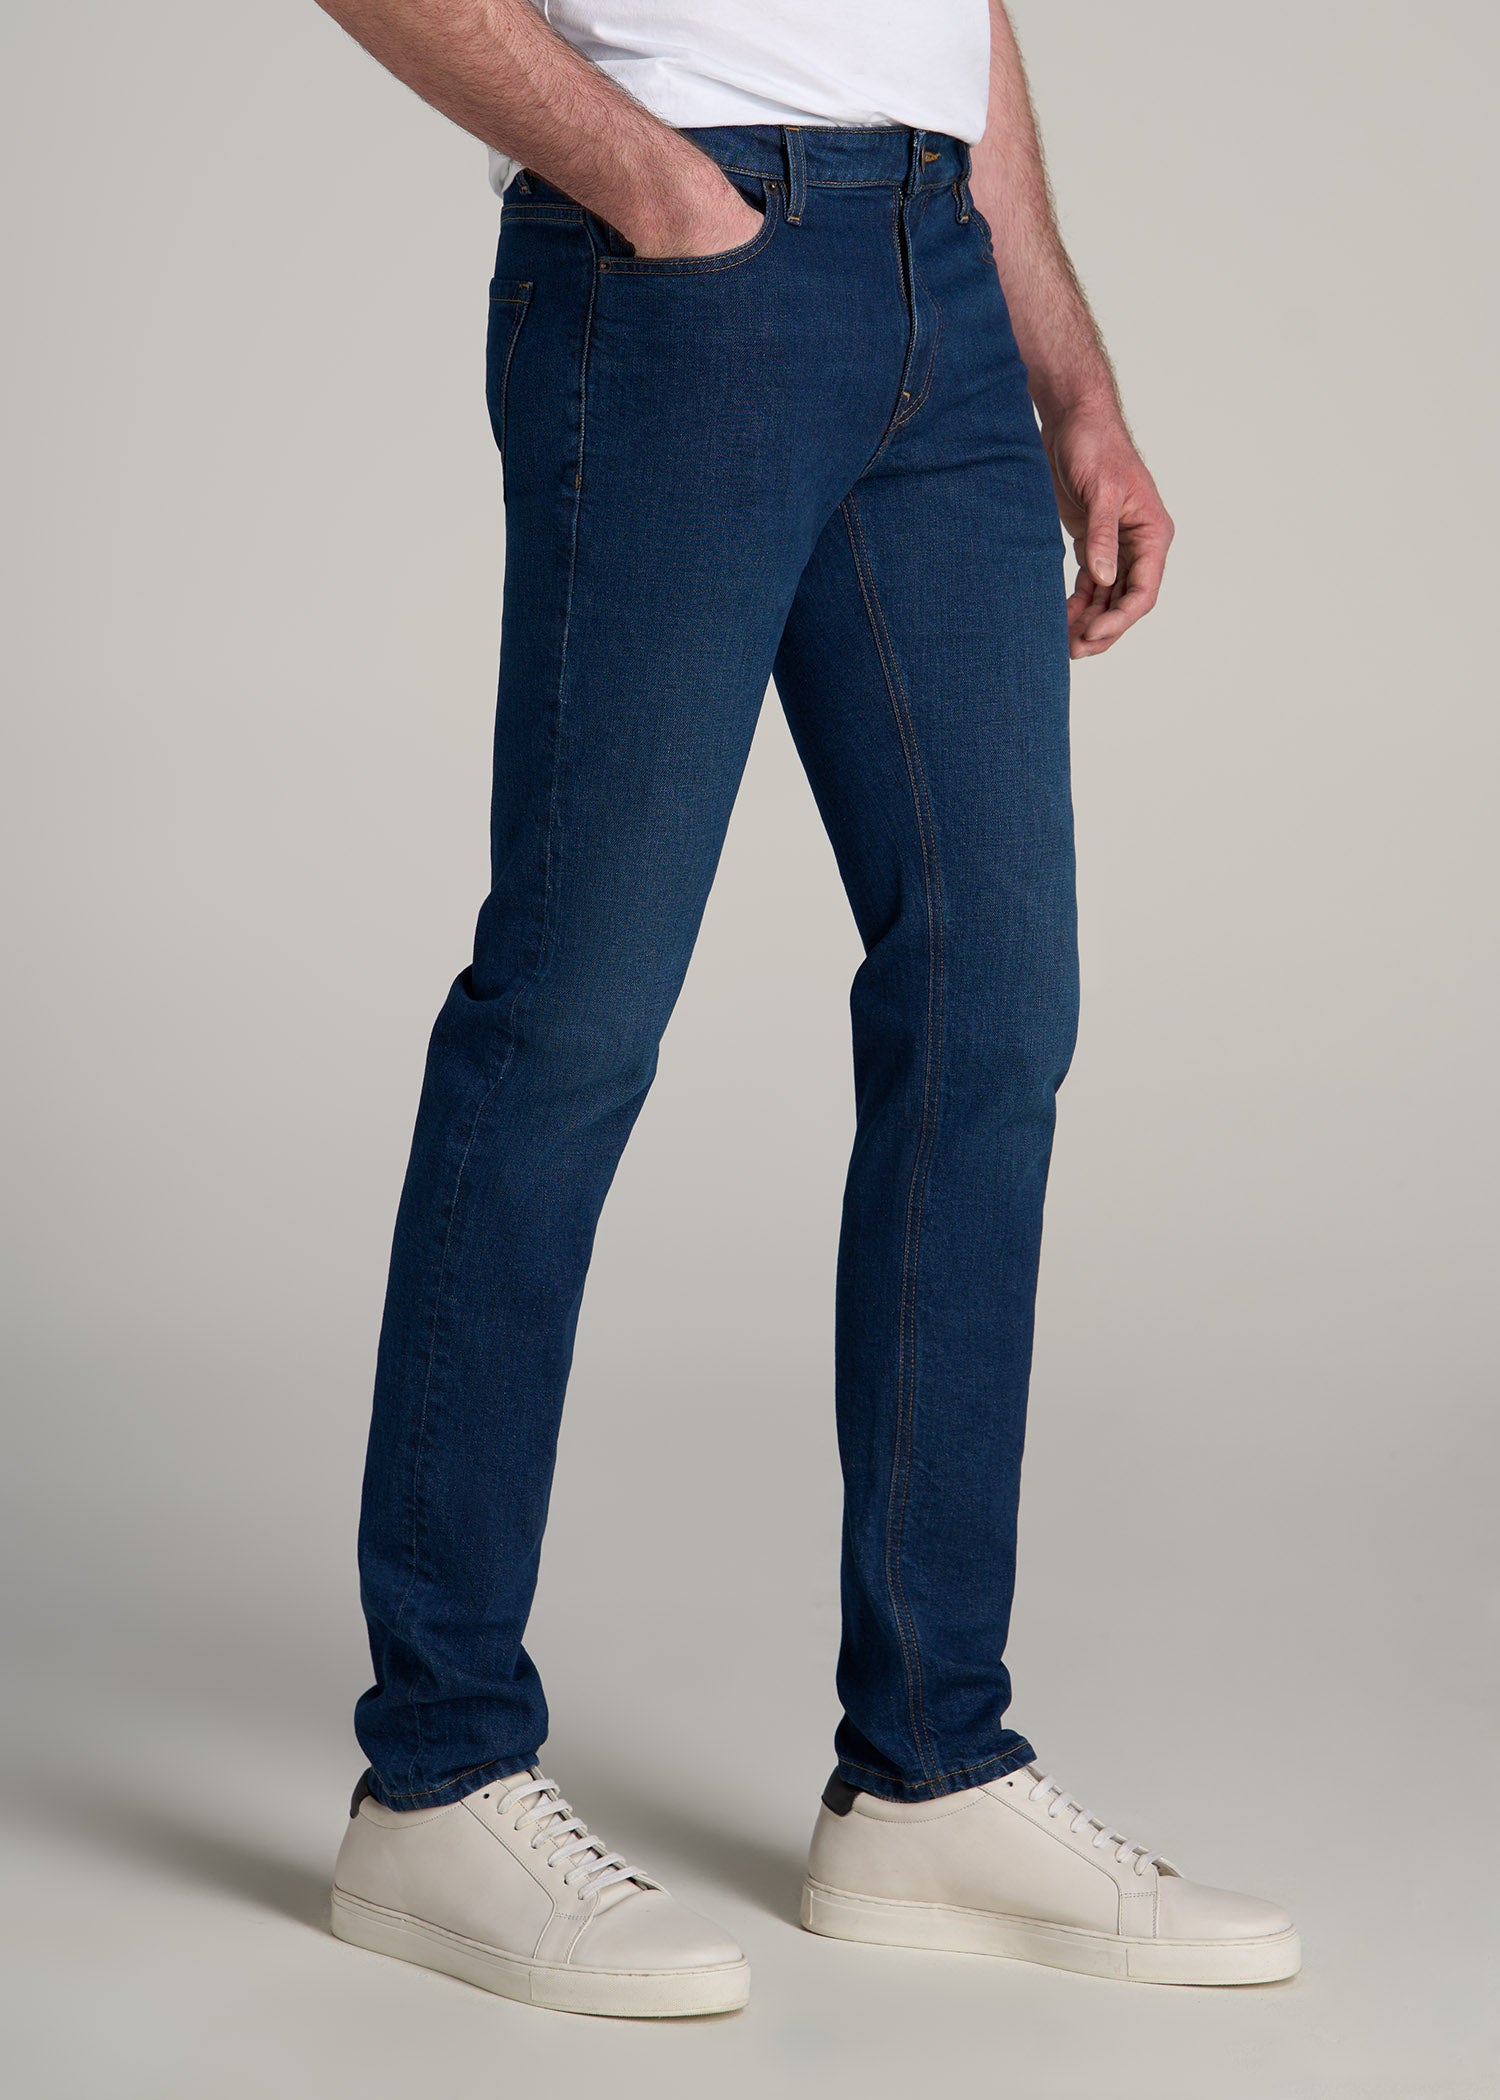 Americana Collection Dylan Slim Fit Jeans For Tall Men | American Tall